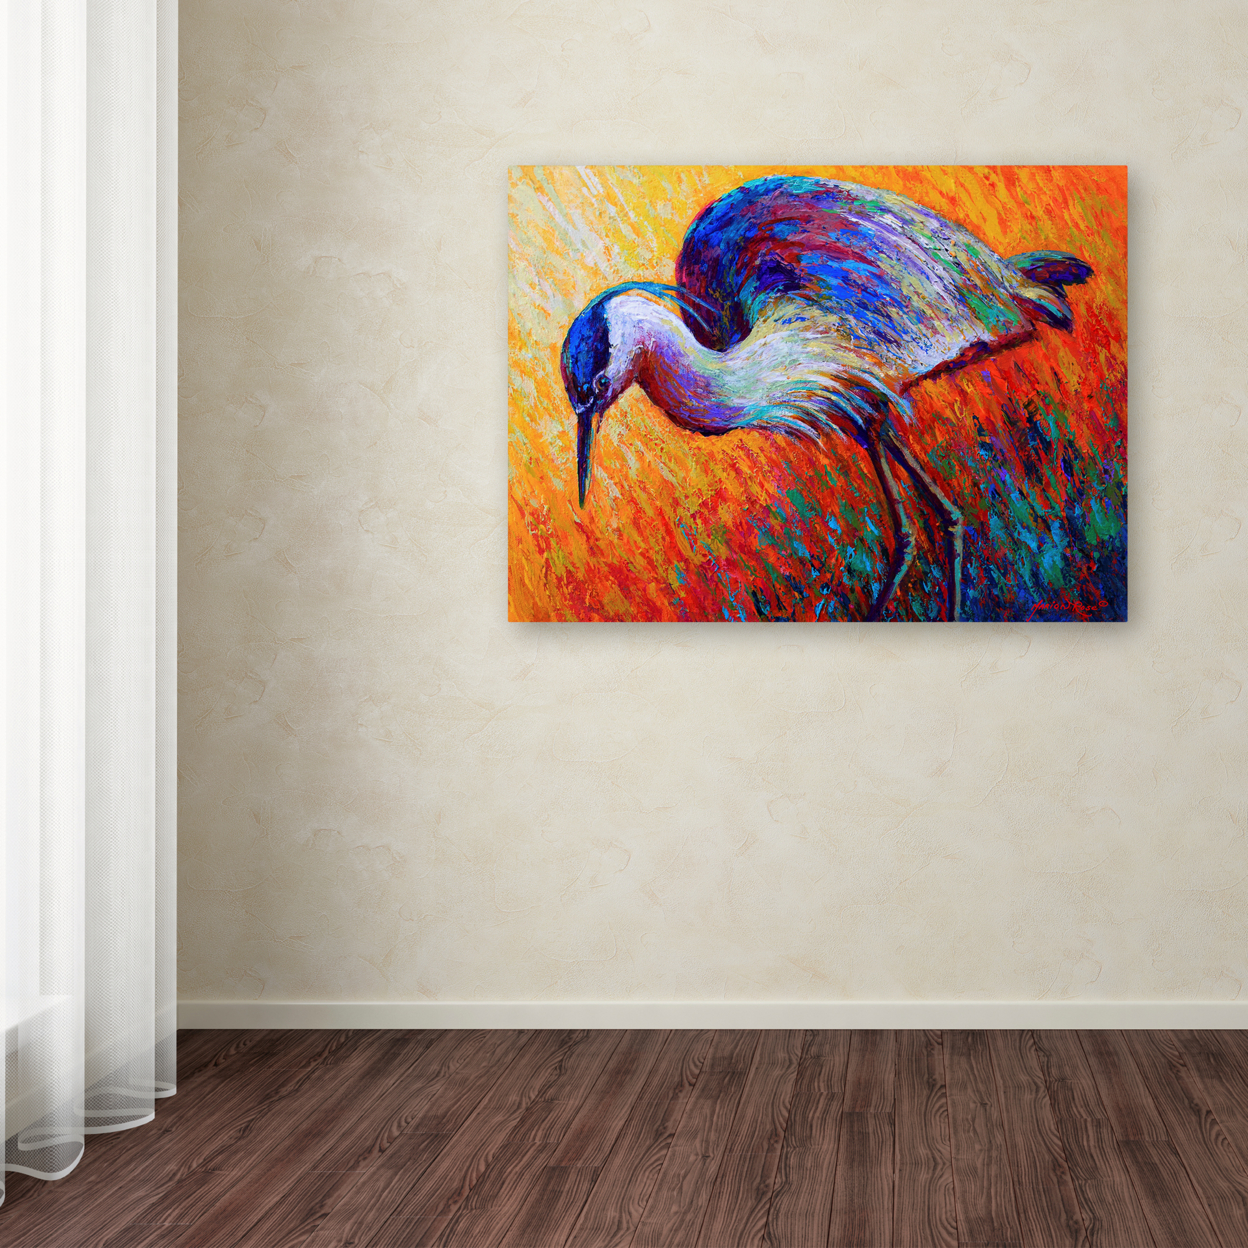 Marion Rose 'Bird Of Dreams' Ready To Hang Canvas Art 18 X 24 Inches Made In USA